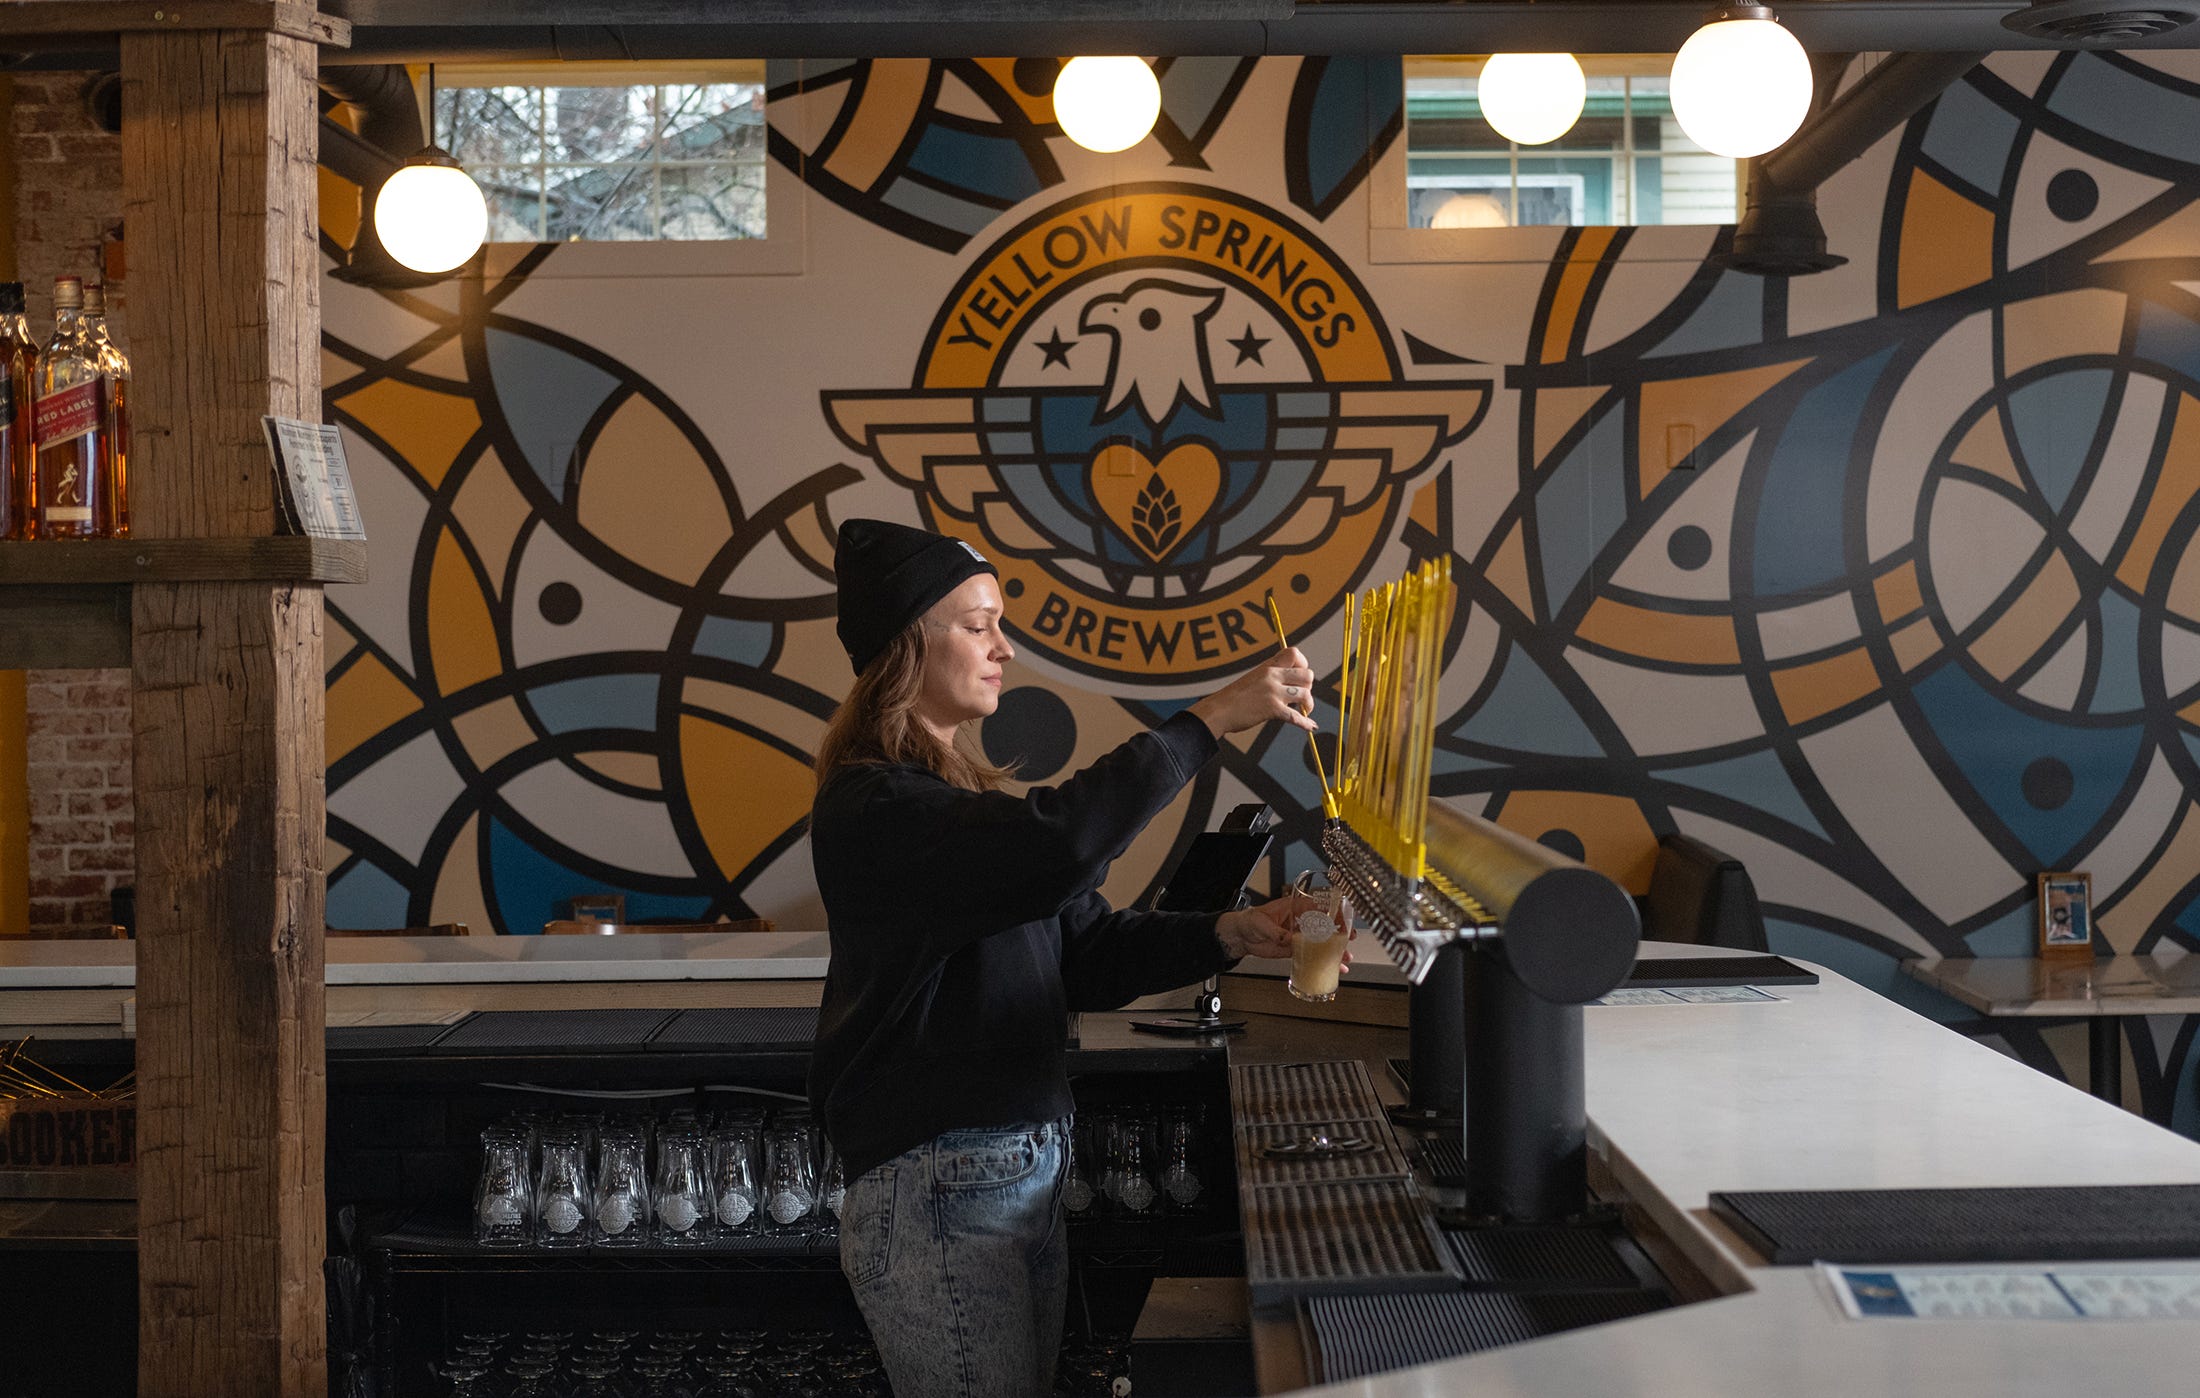 Faye Diebold pours a draft beer at Yellow Springs Brewery in Clintonville.